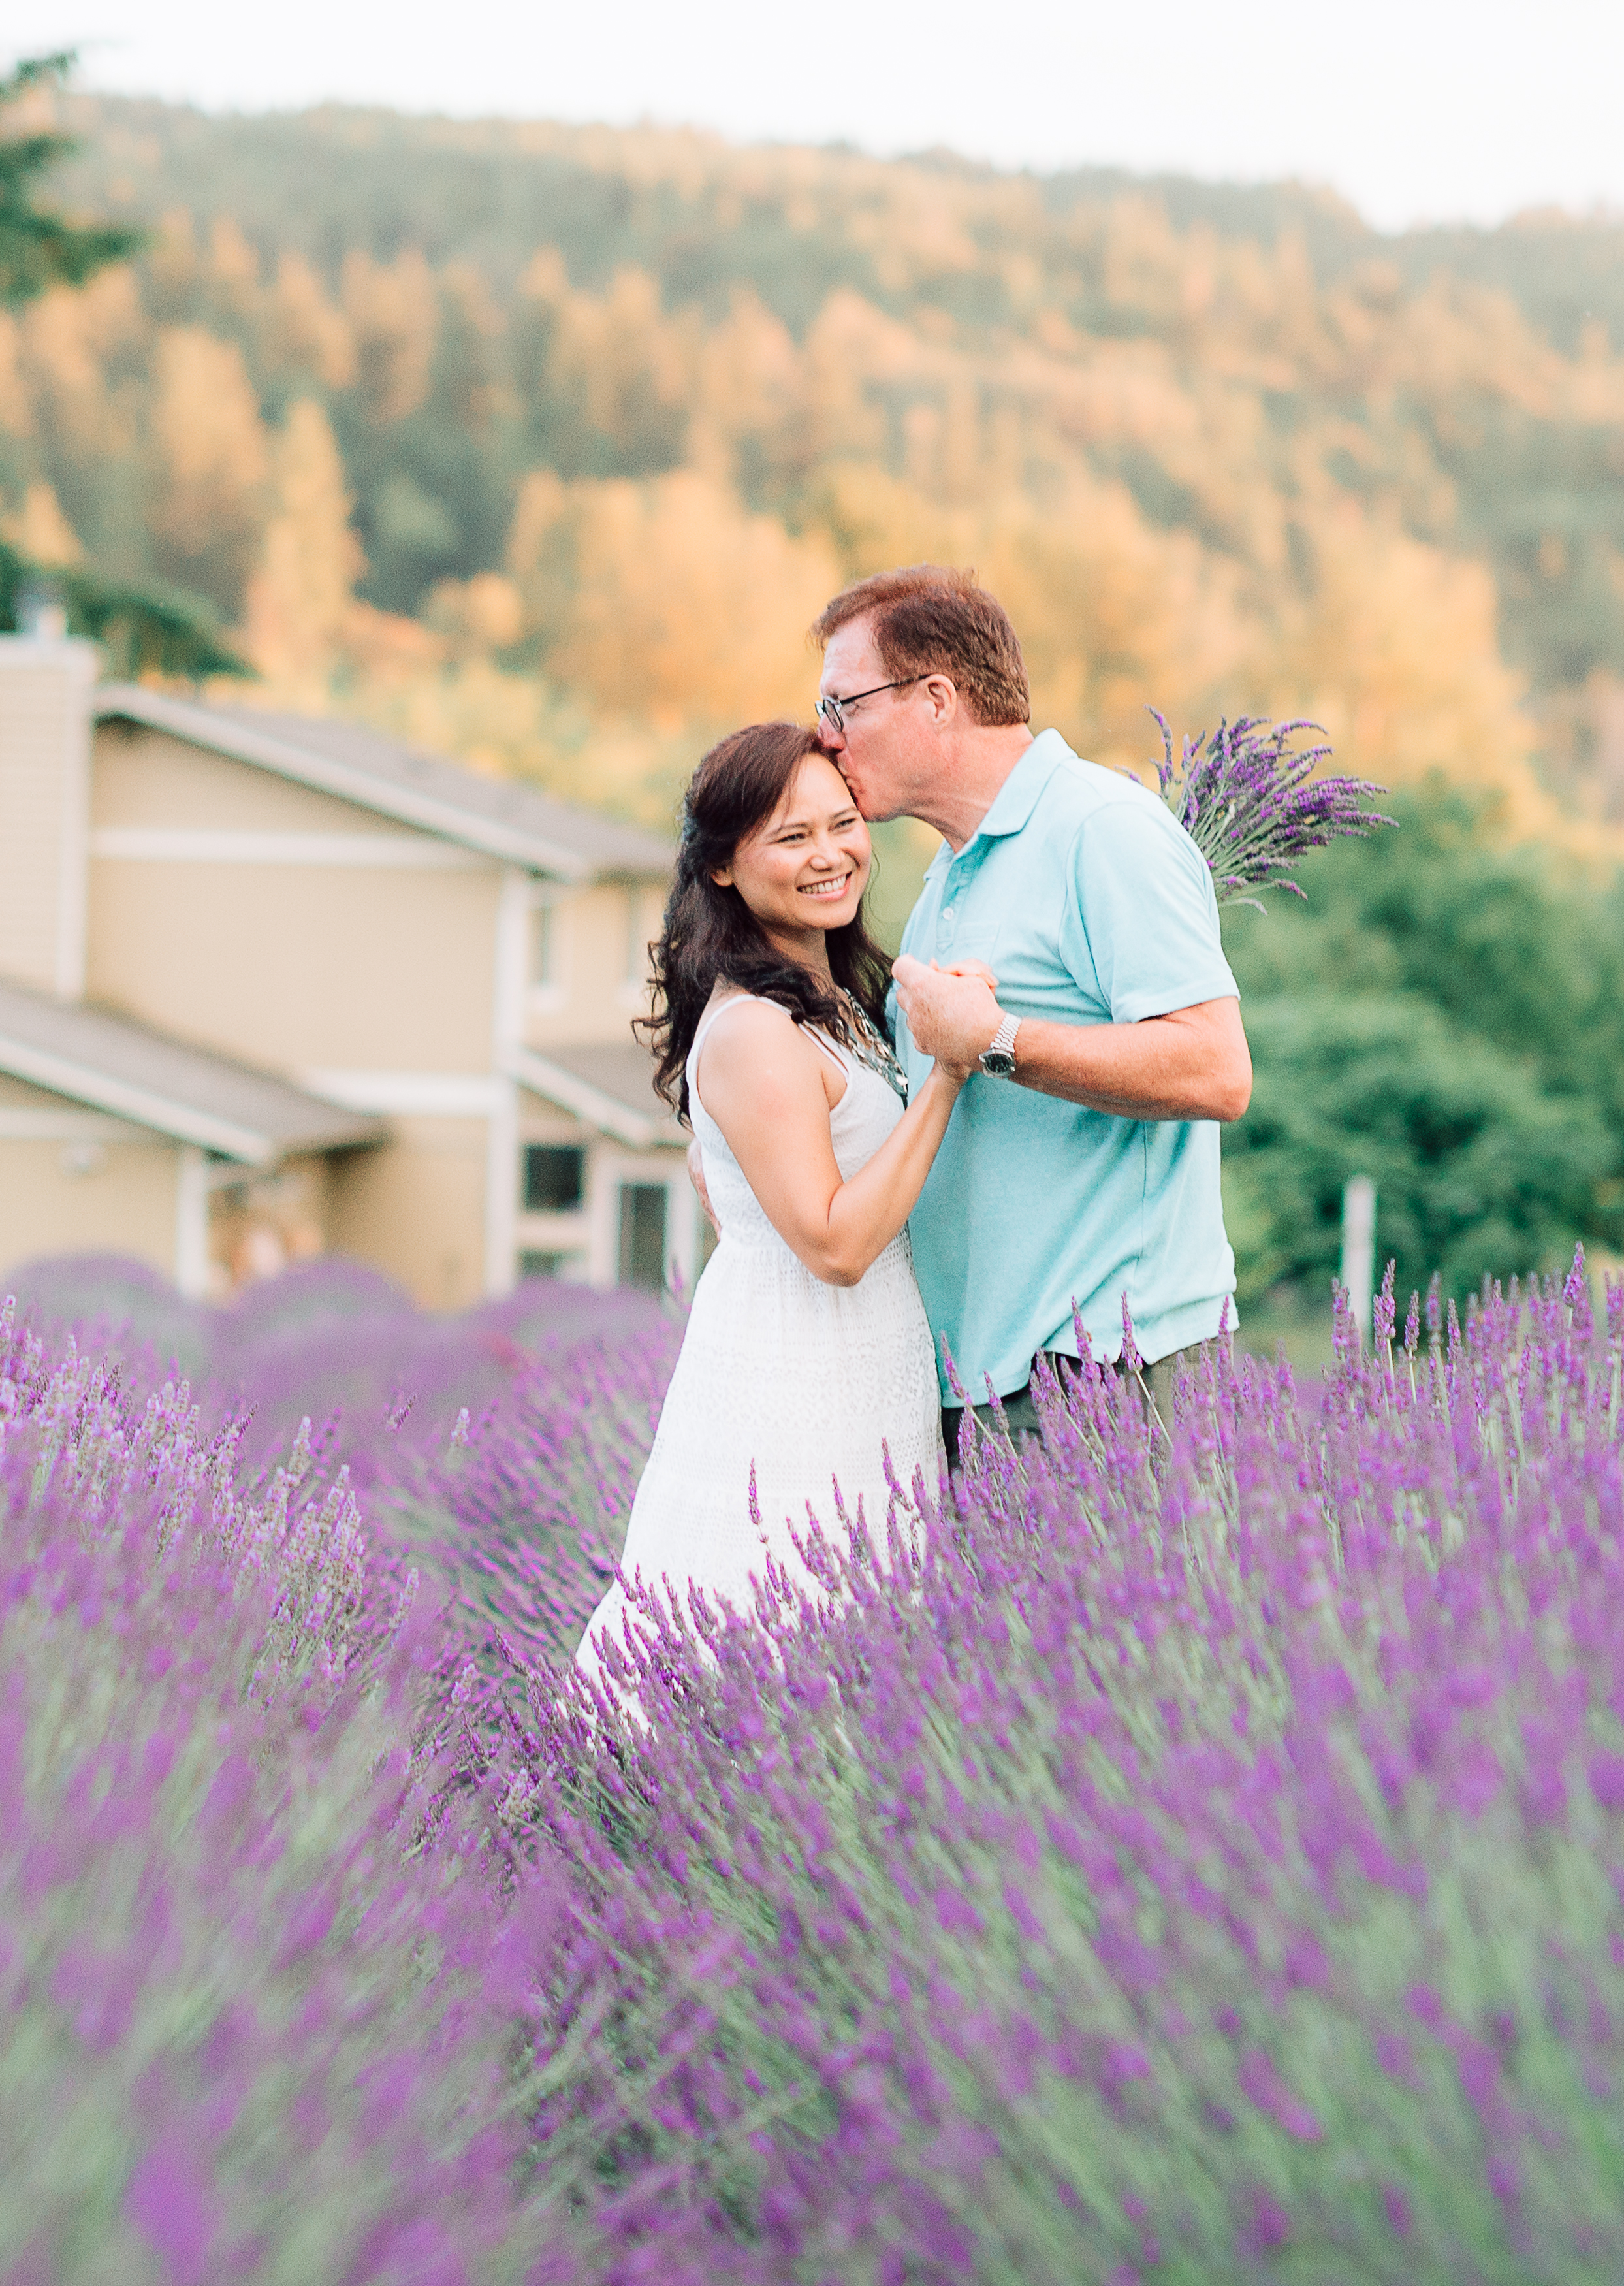 engagement_lavenderfield_youseephotography_LidiaOtto (63).jpg